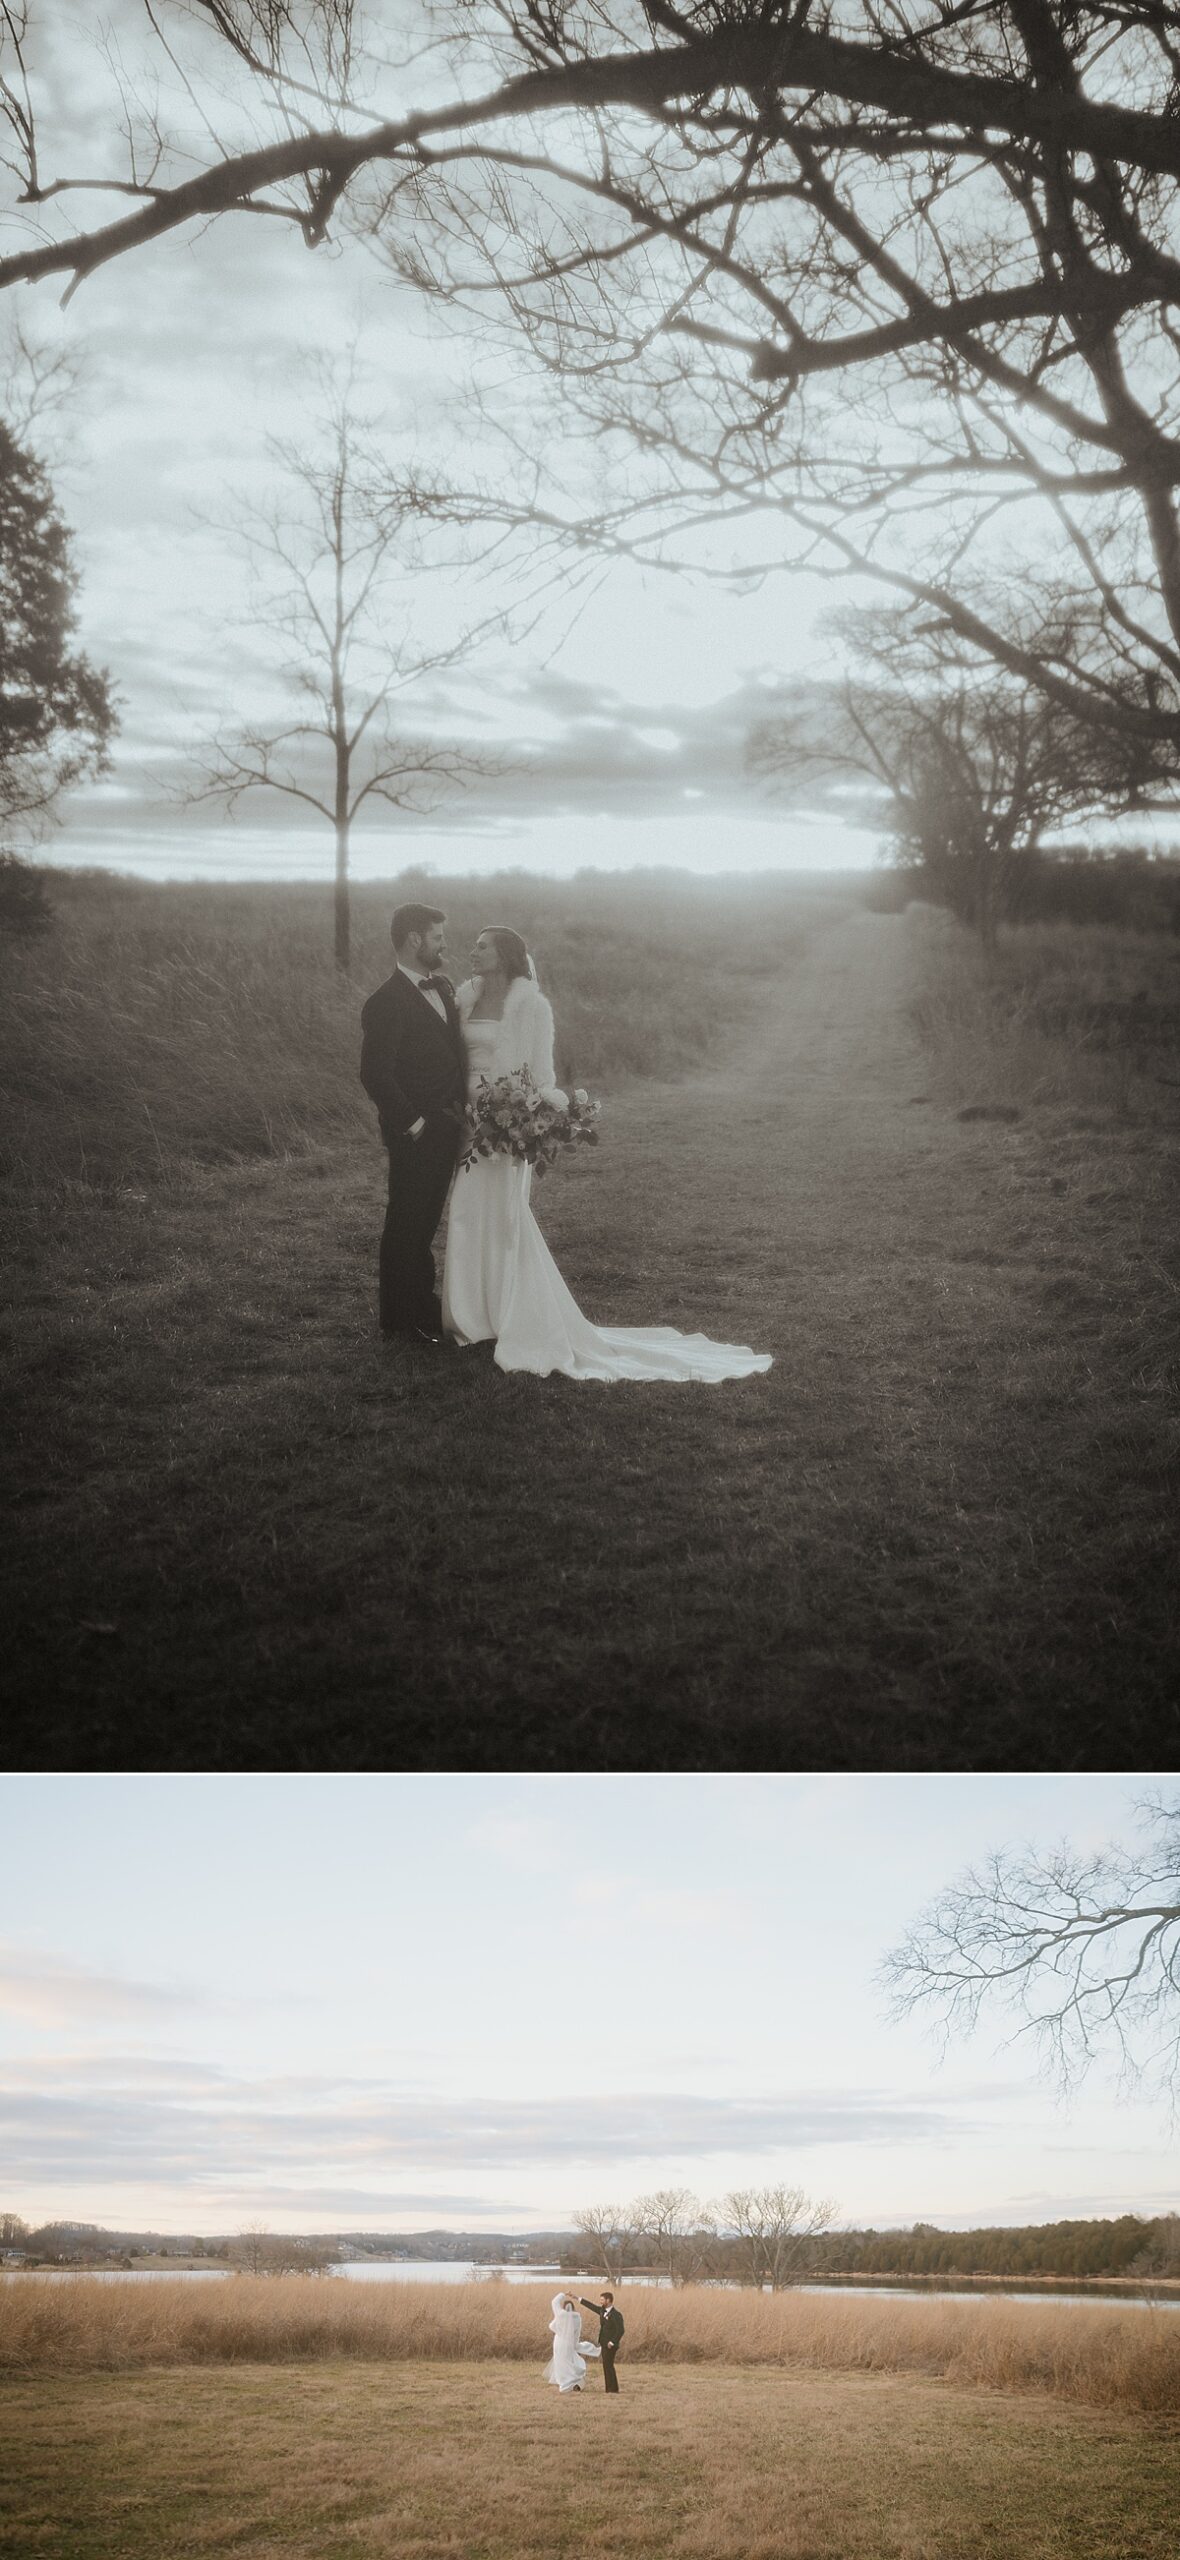 Film style outdoor bride and groom portraits.